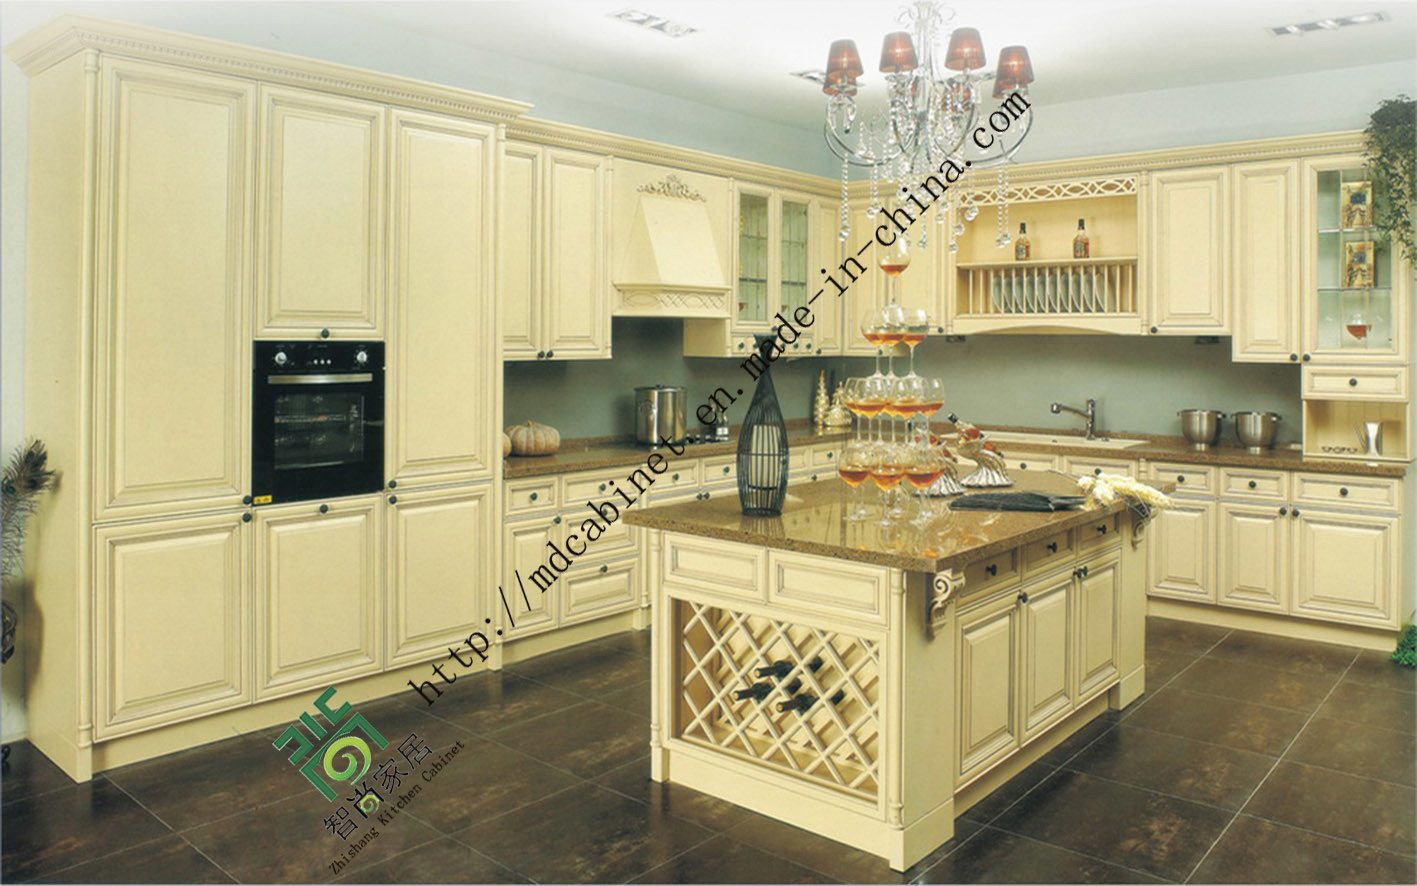 2015 Star Product Solid Wood Kitchen Cabinets (zs-290)